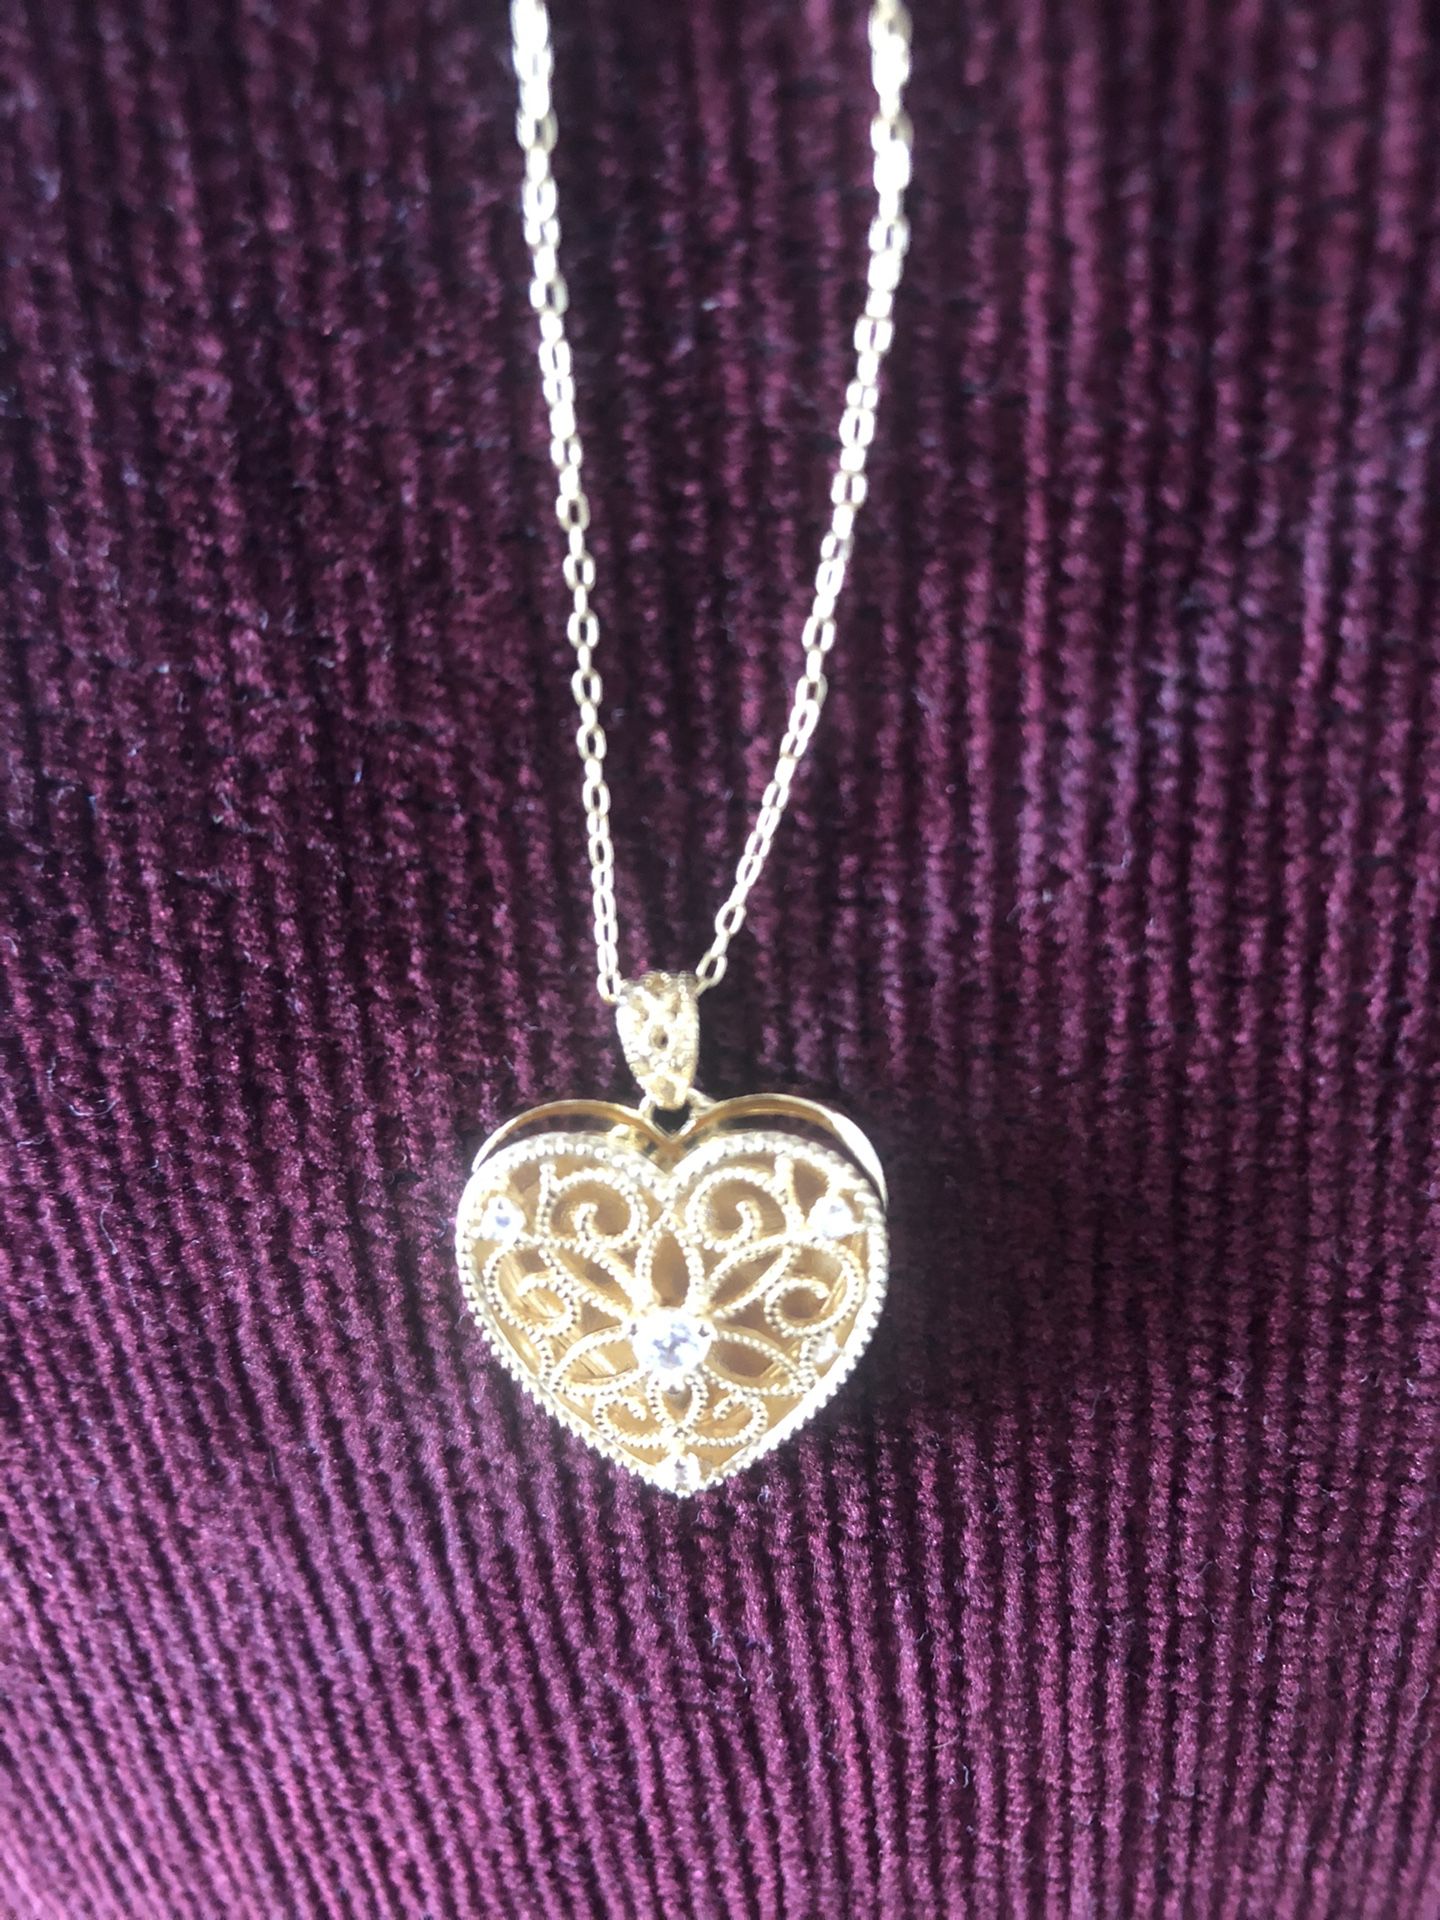 Brand New Necklace Open Heart ❤️ 